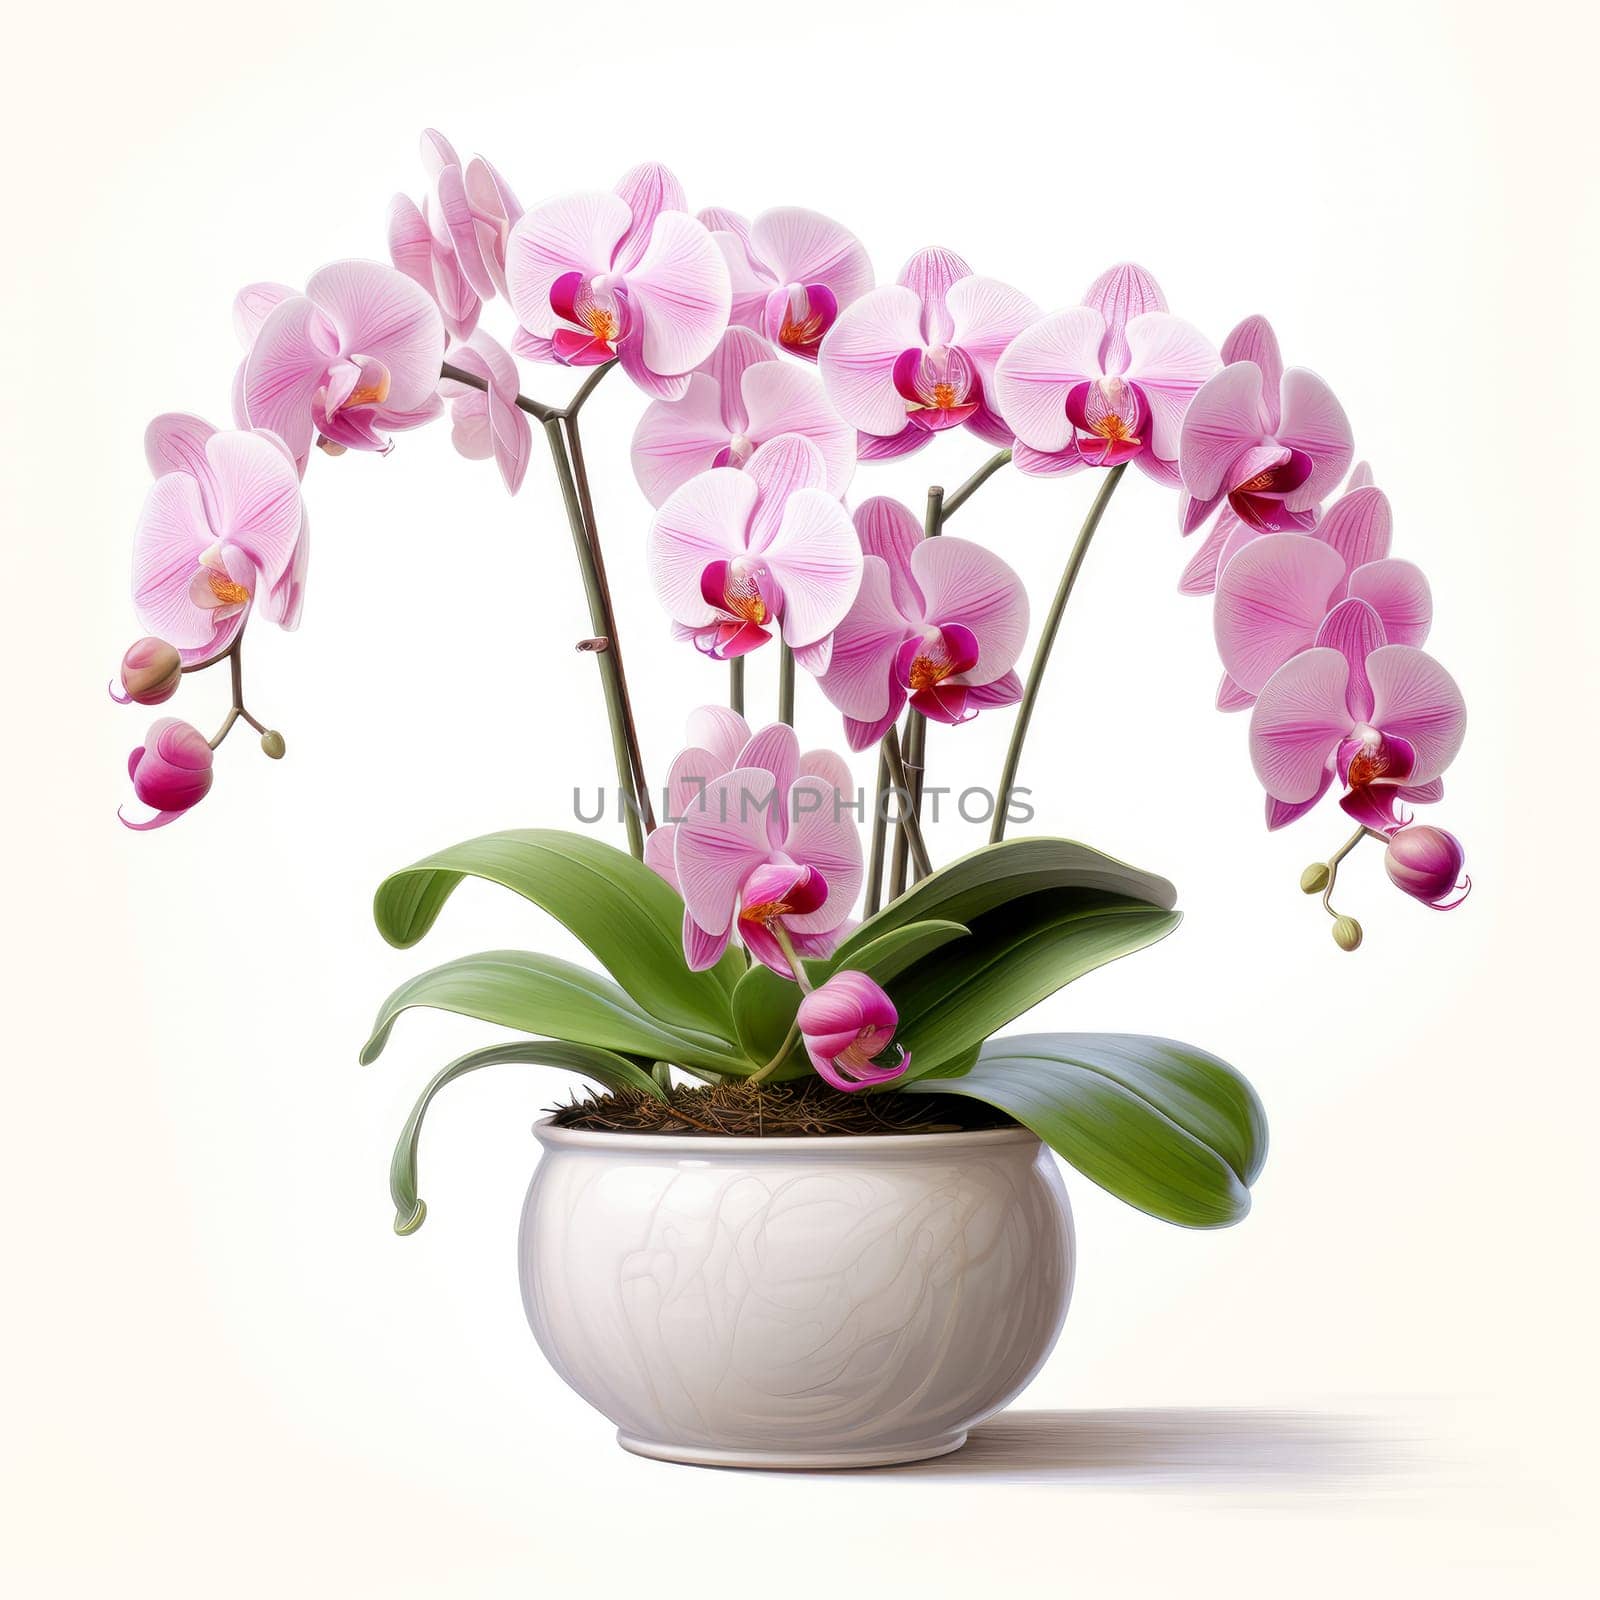 Pink orchid in a white flowerpot on white background. isolated object. by Ramanouskaya